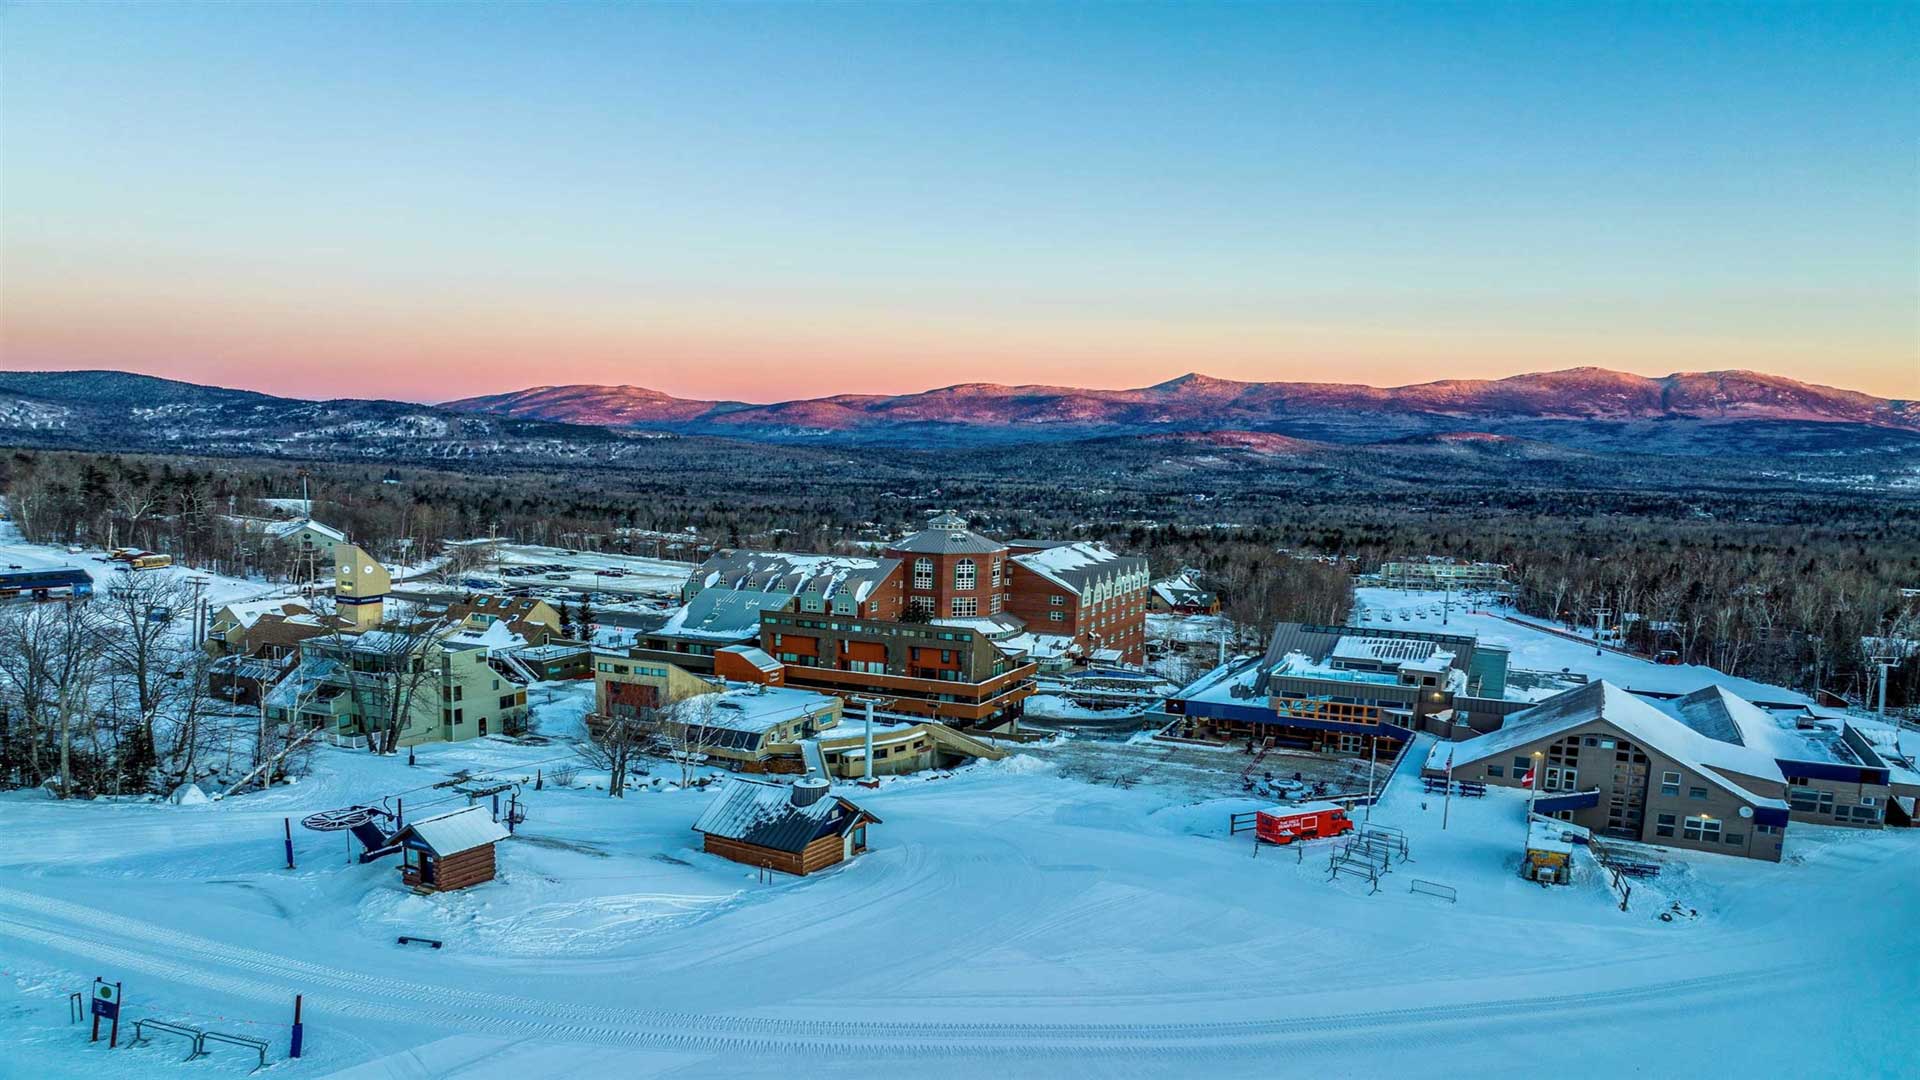 Sugarloaf Village at sunrise with the Bigelows in the background